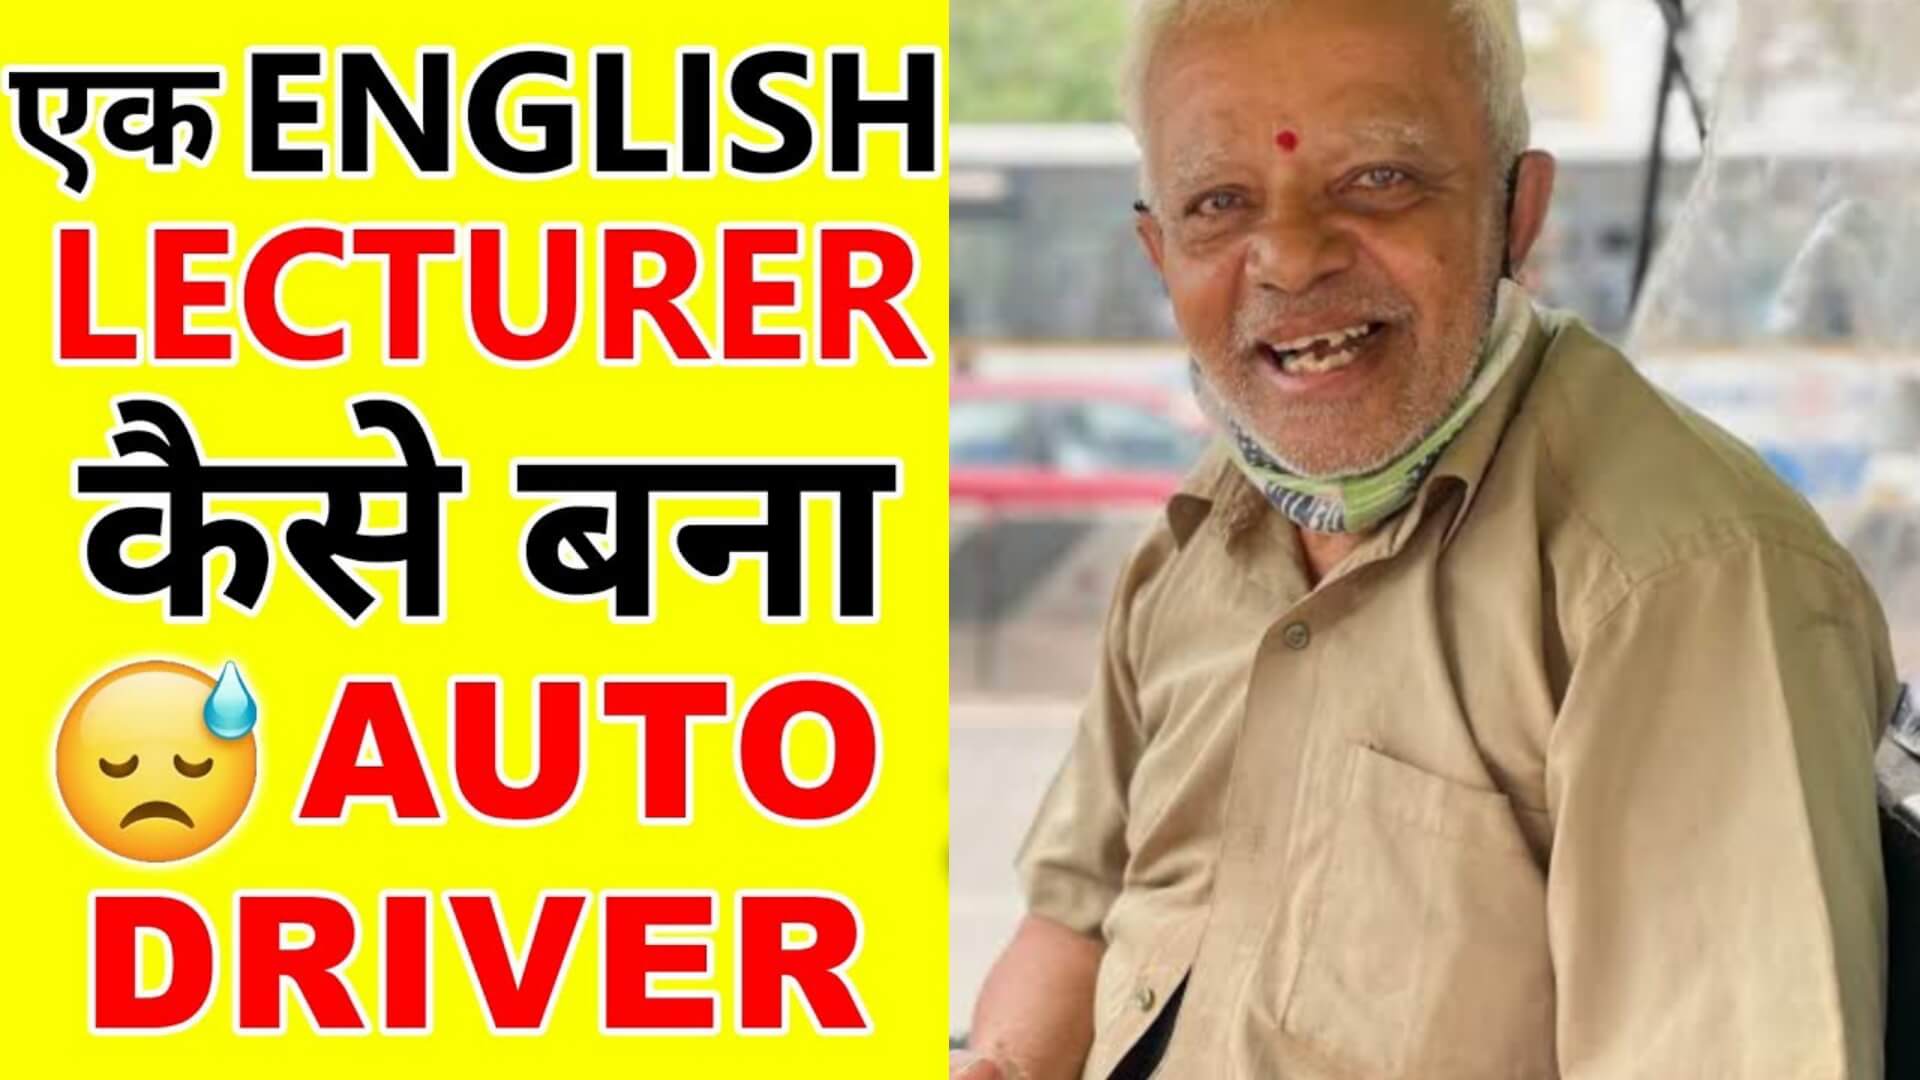 Become an English Lecturer Auto Driver